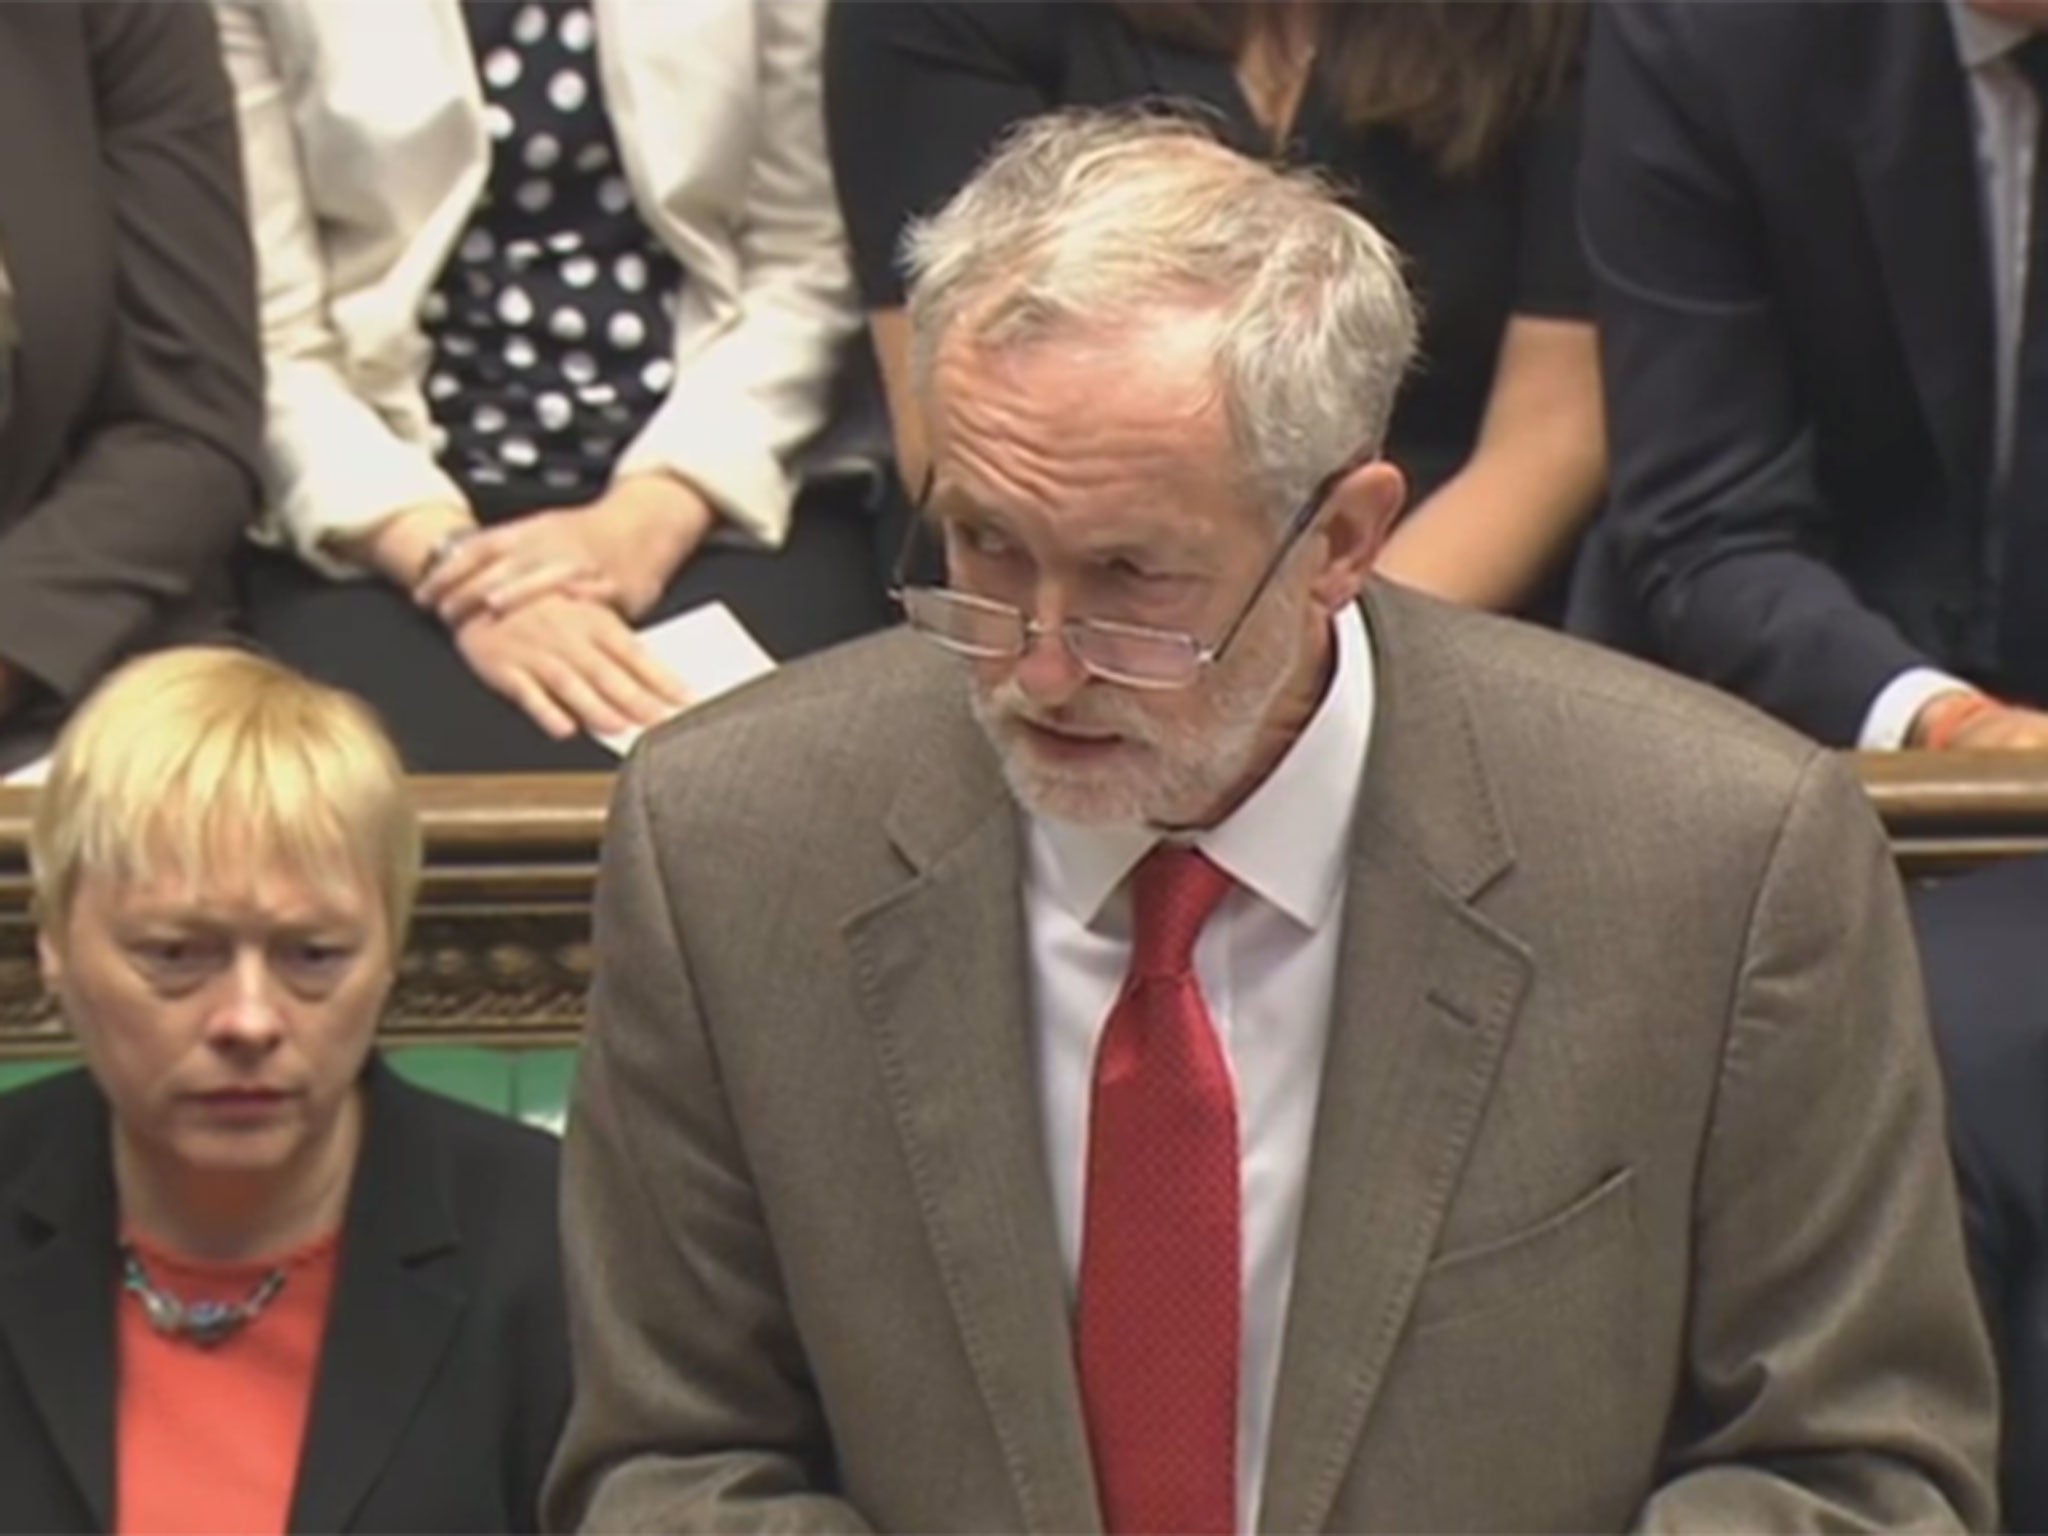 Jeremy Corbyn's withering response to MPs laughing at his questions